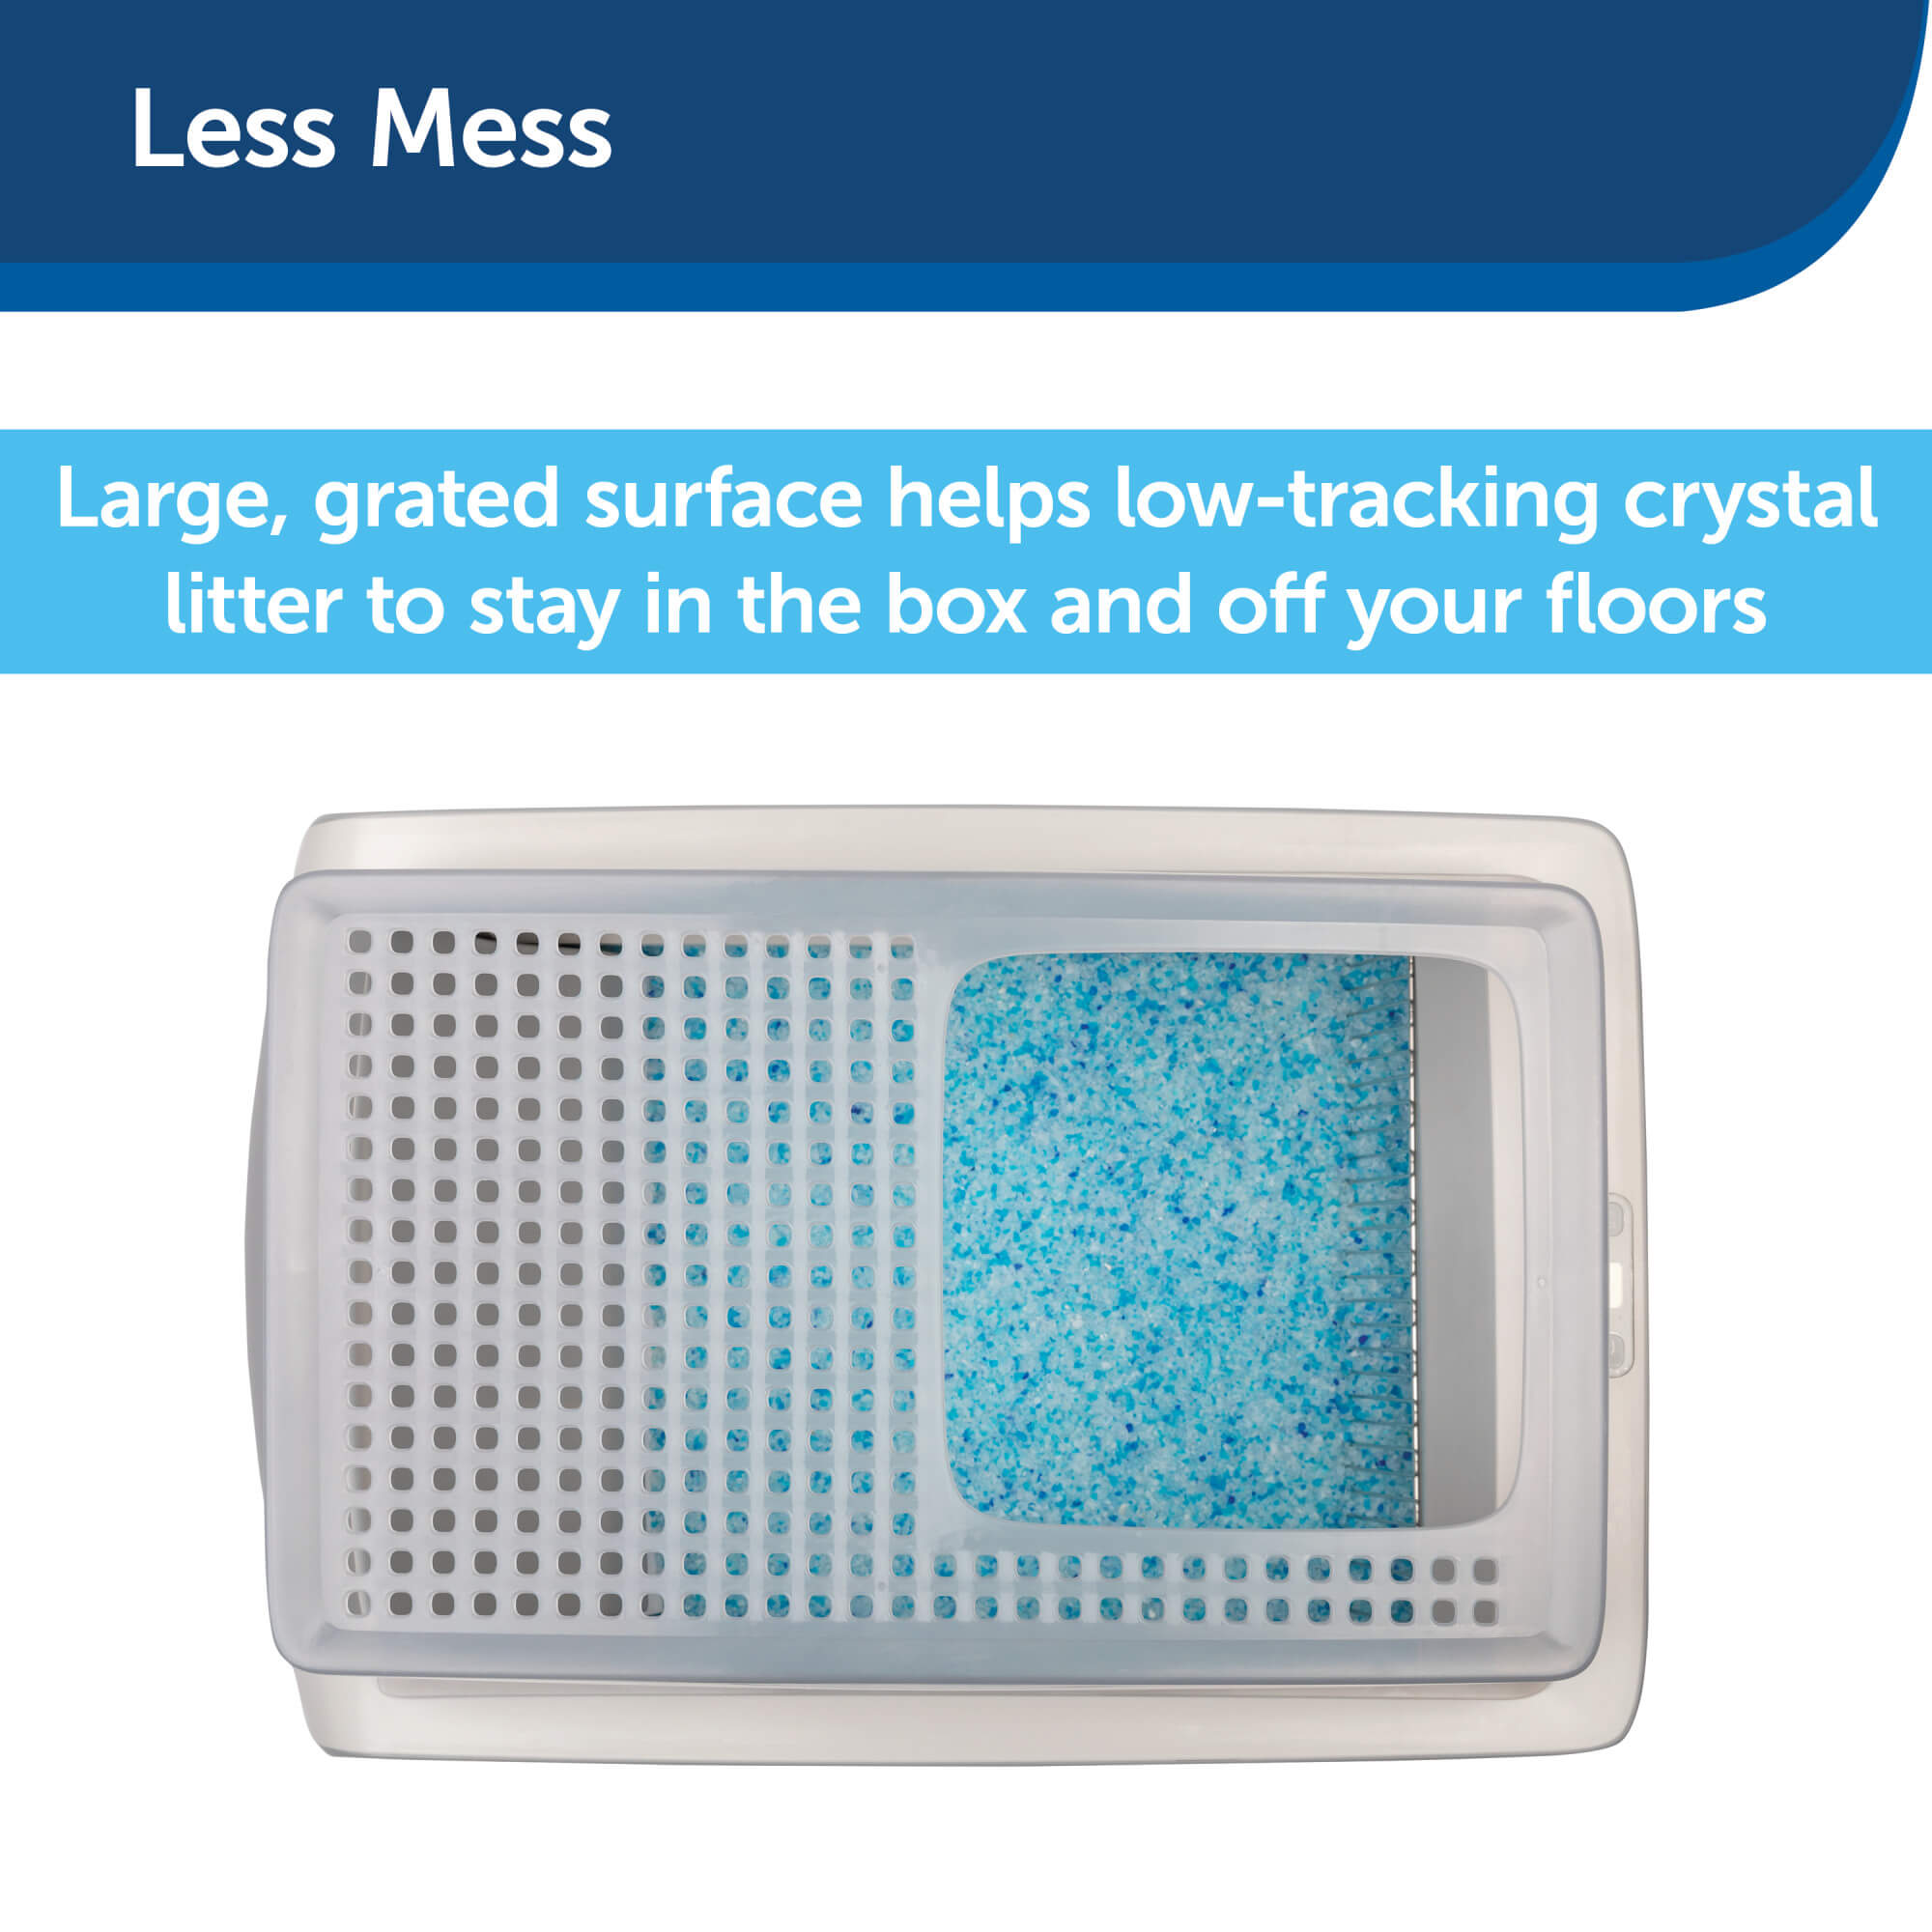 less mess, large grated surface helps low-tracking crystal litter to stay in the box and off your floors